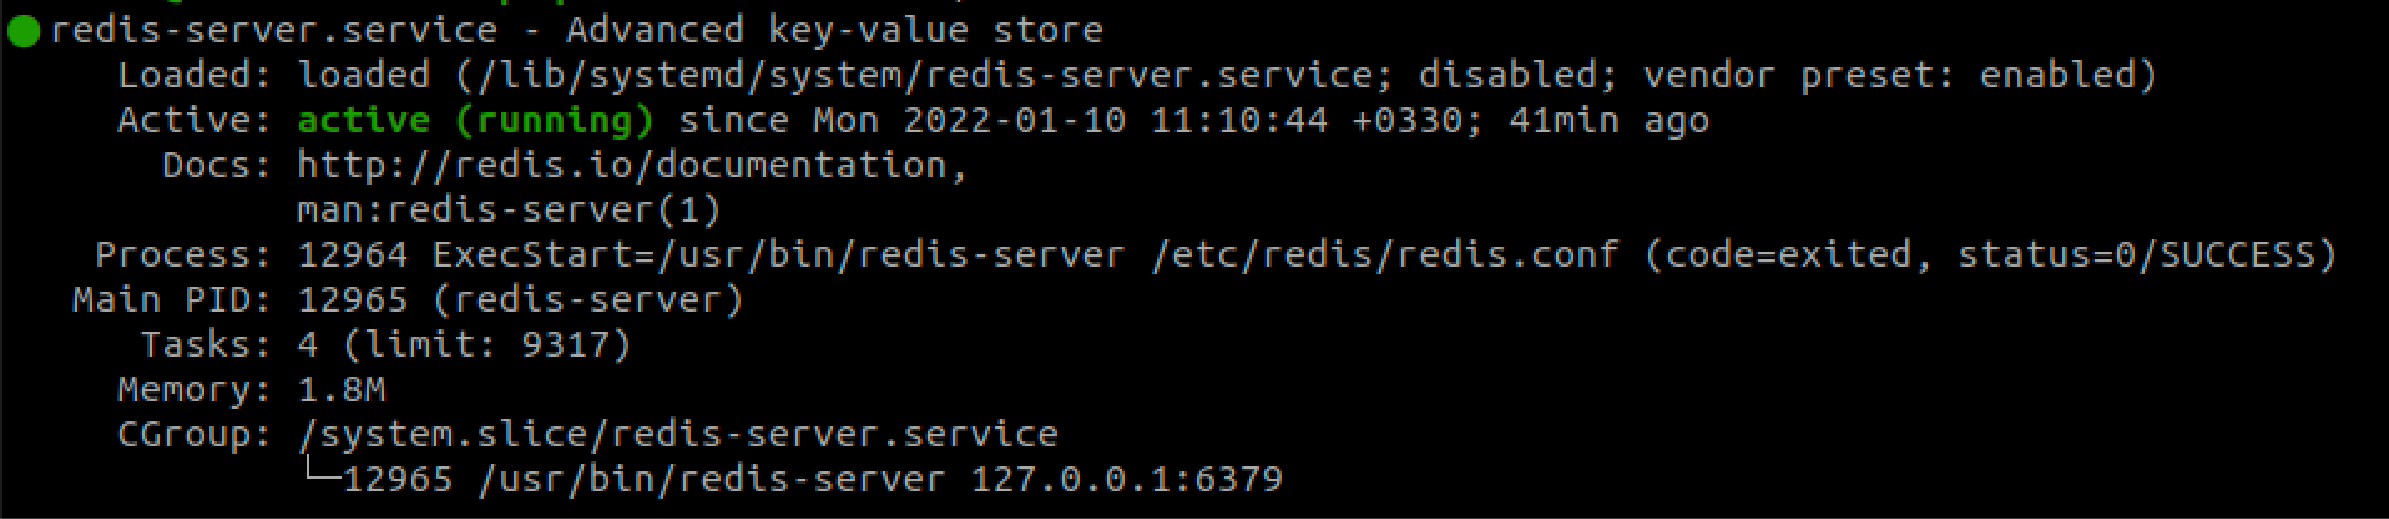 Command line display showing the status of the Redis service on Ubuntu.